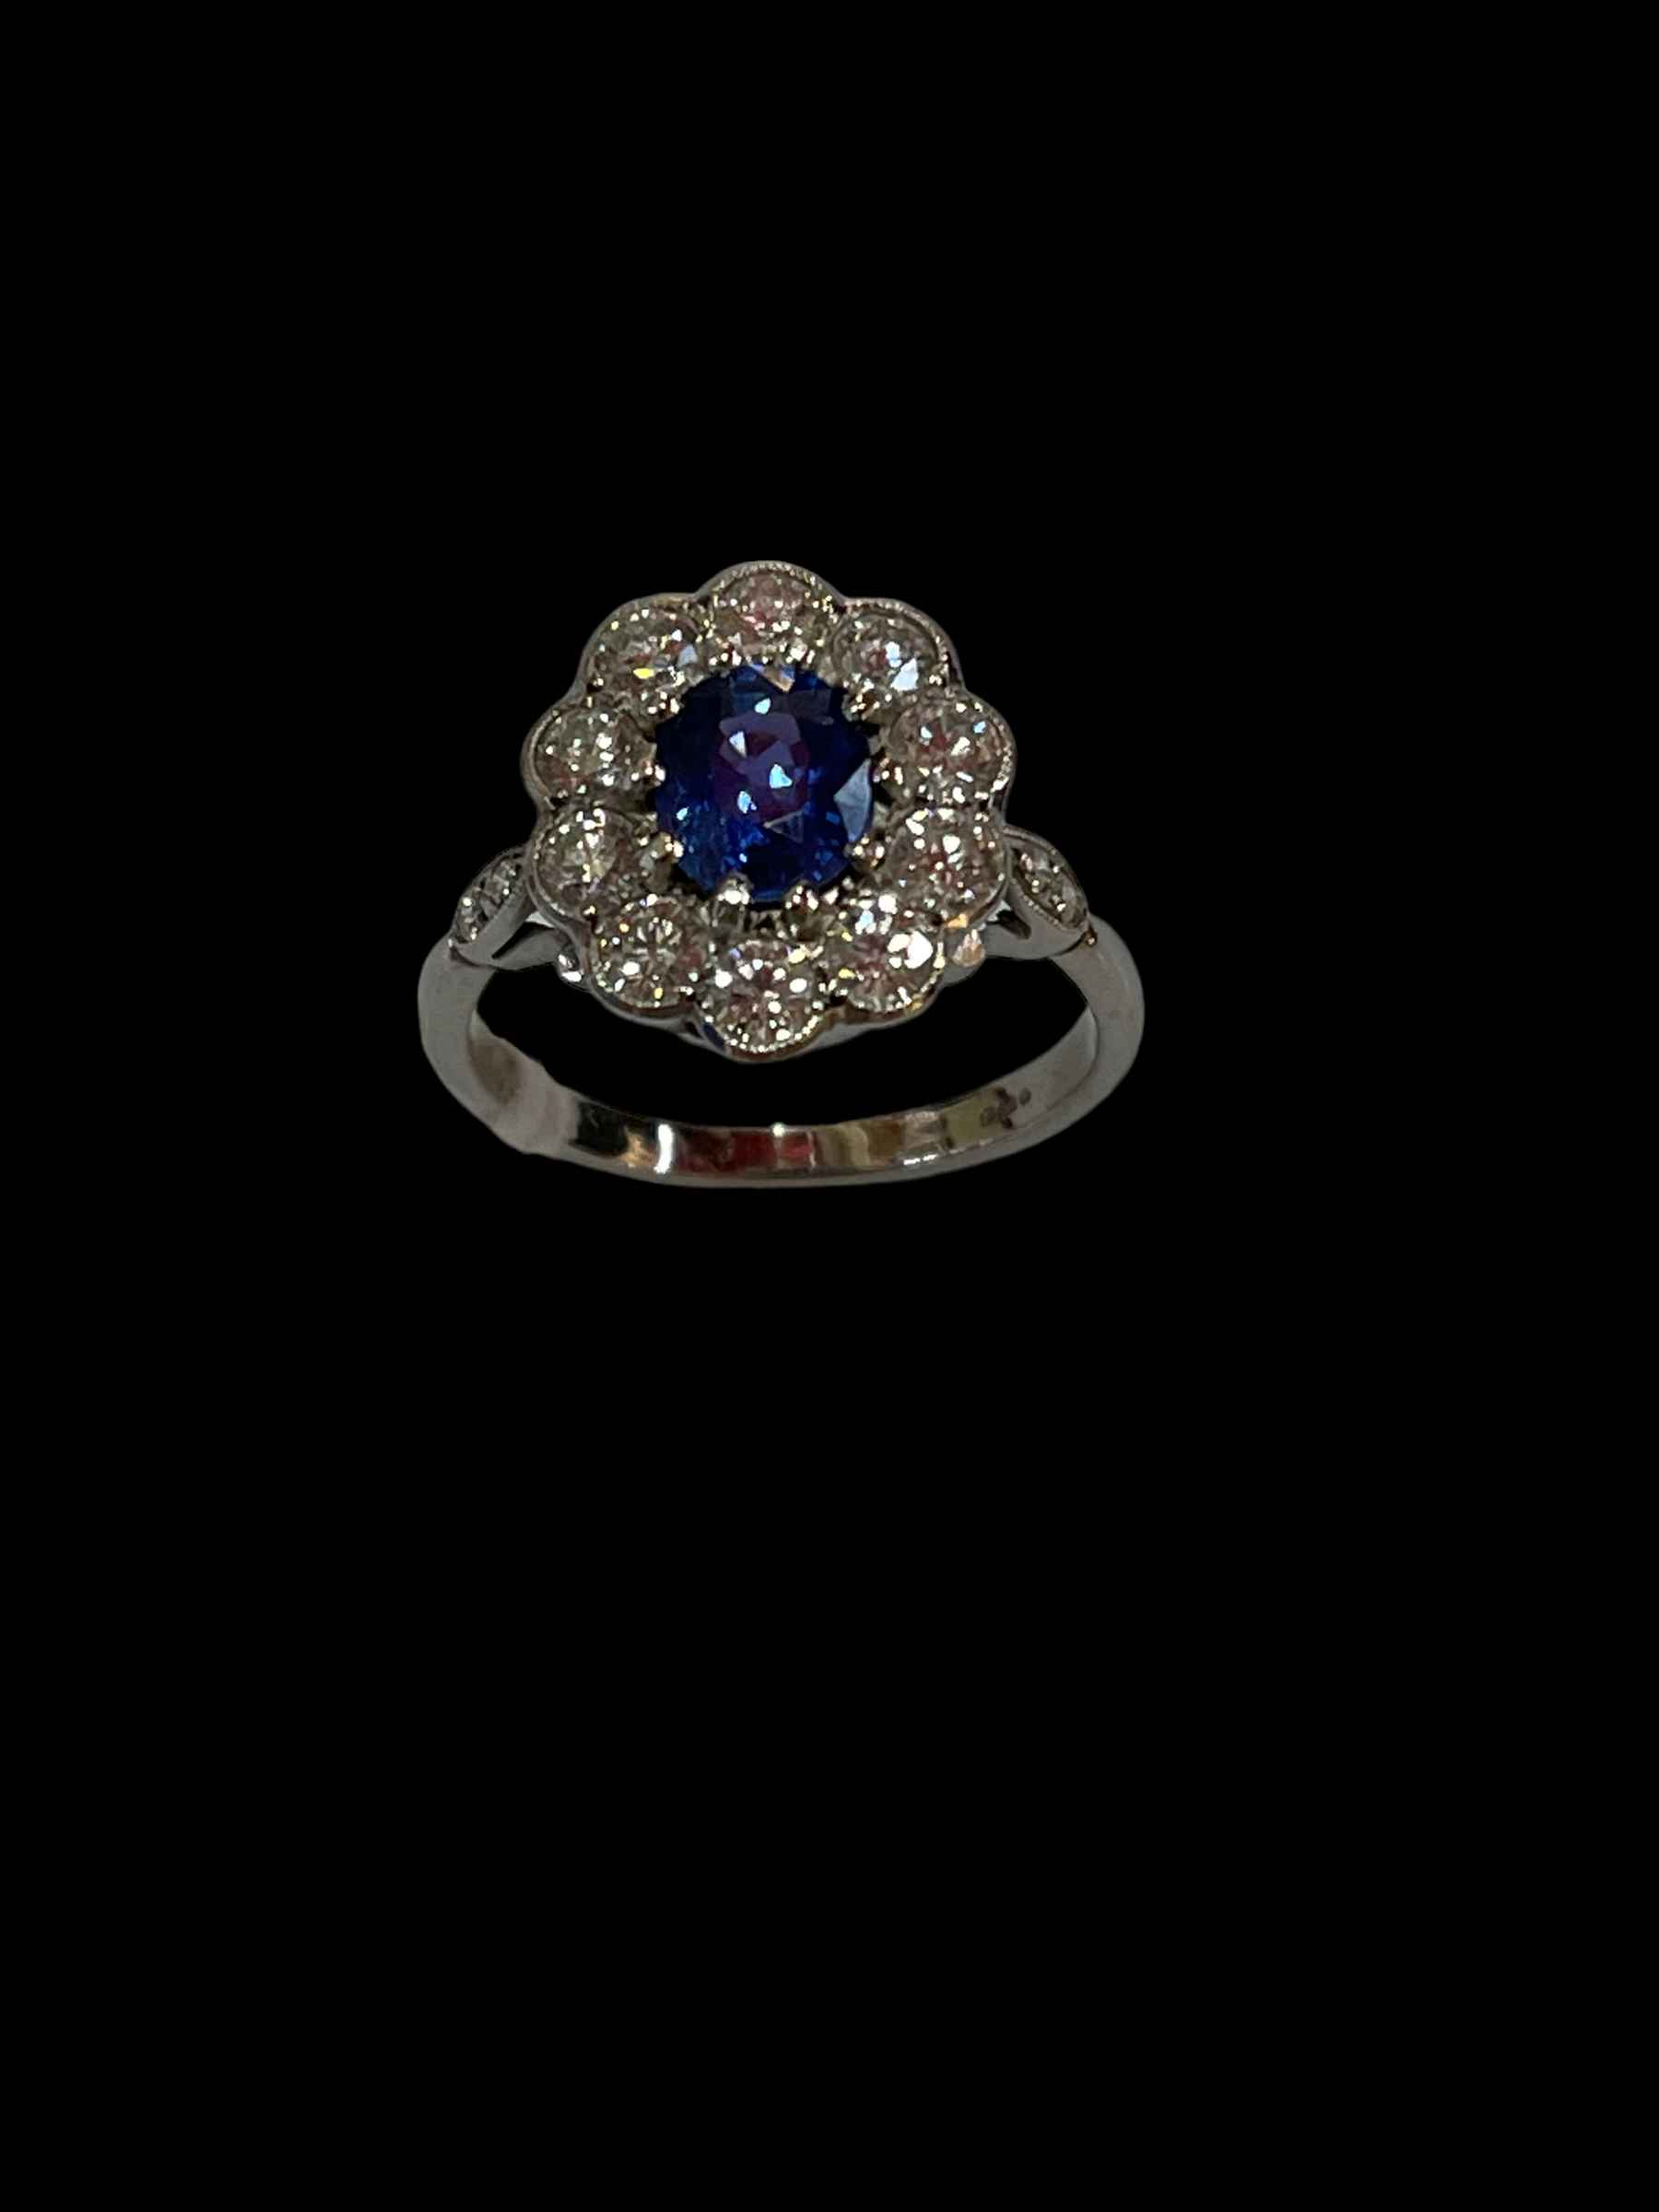 Stunning sapphire and diamond cluster 18 carat white gold ring, - Image 2 of 3